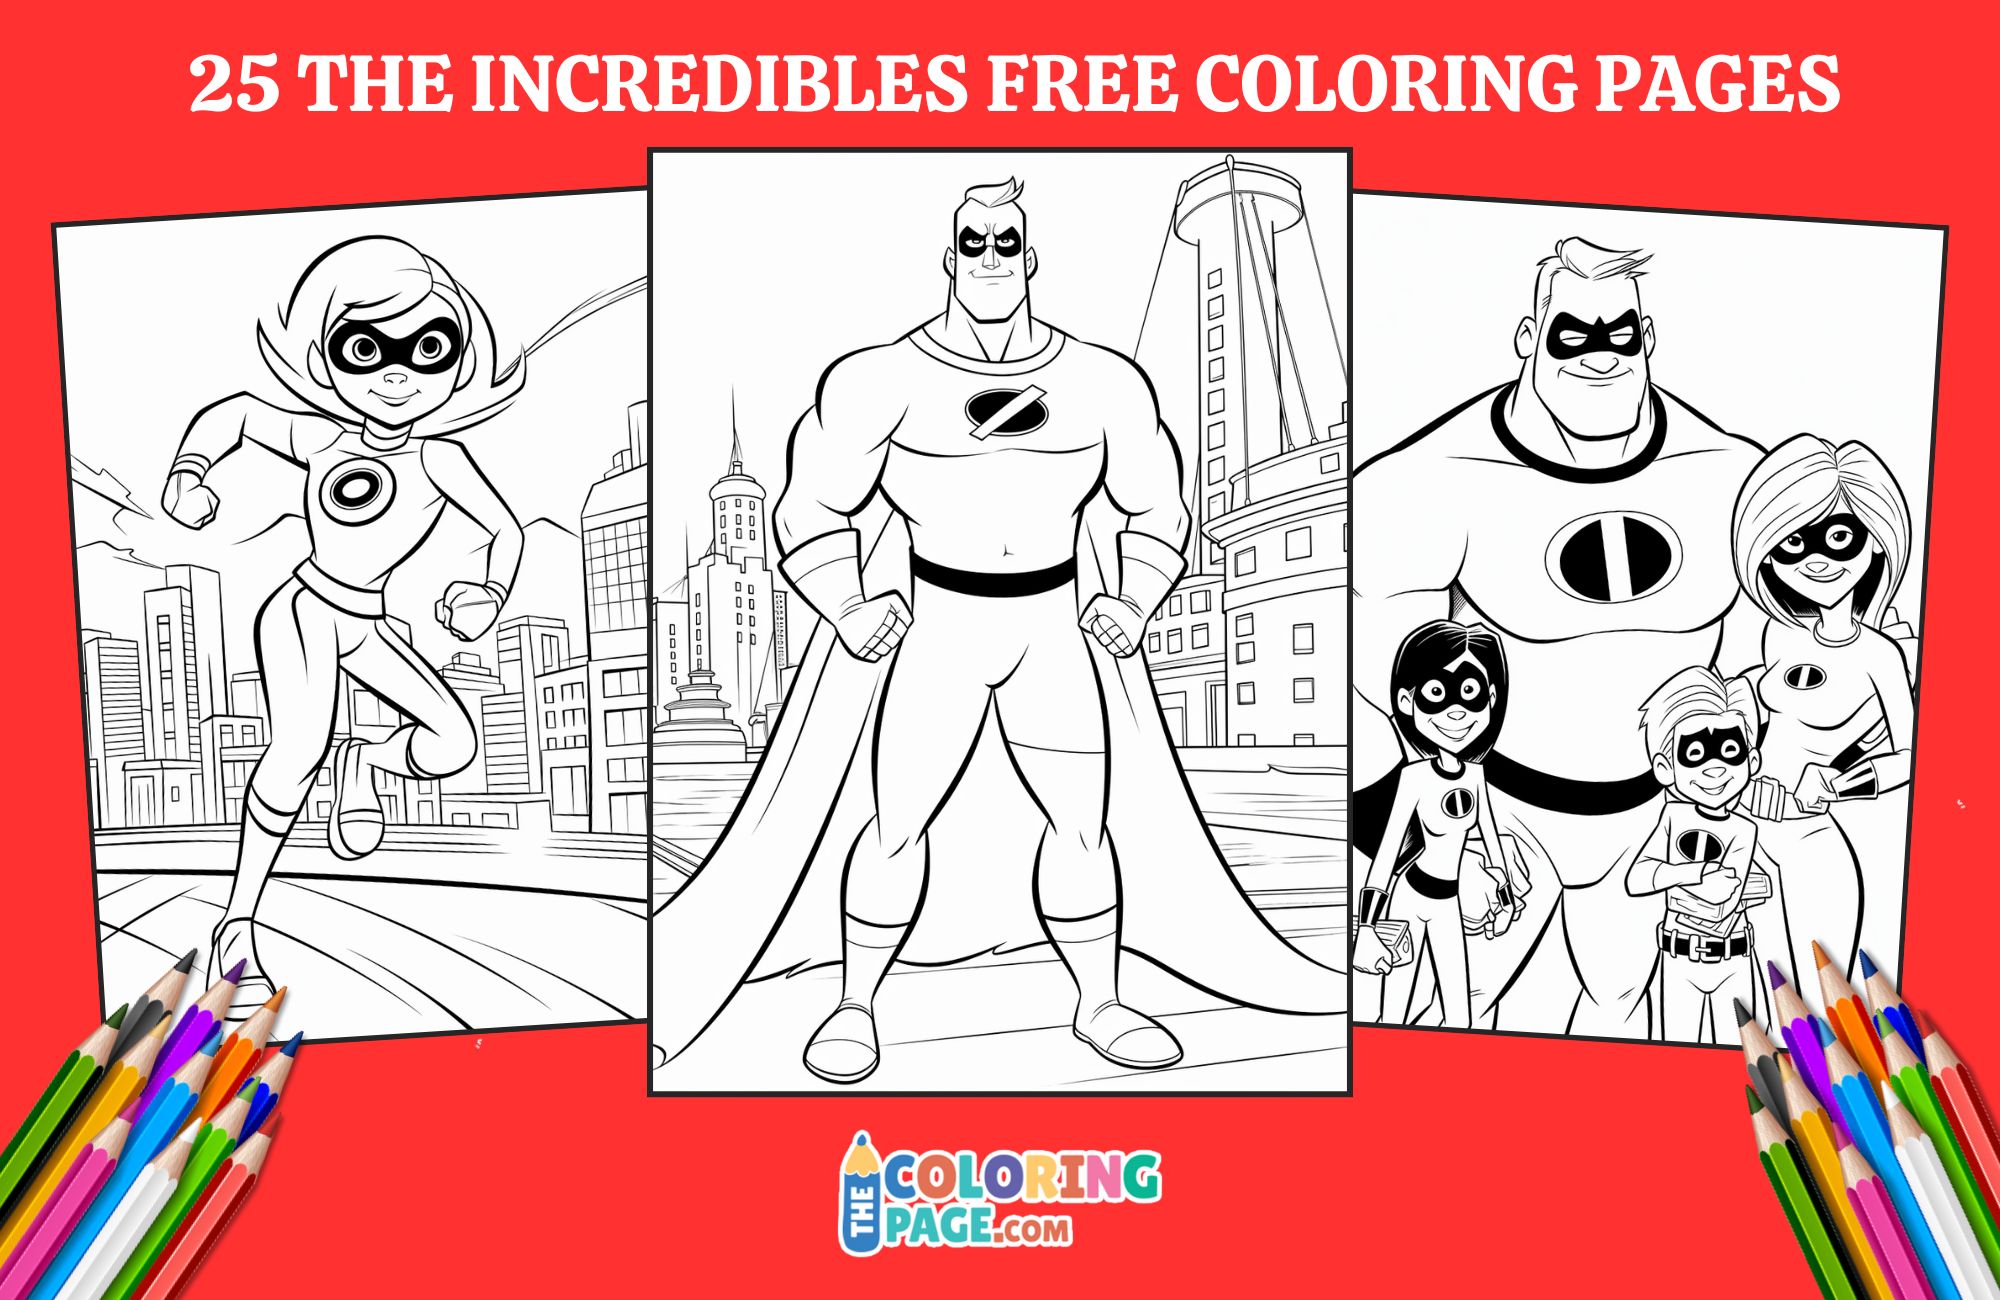 25 The Incredibles Coloring Pages for kids